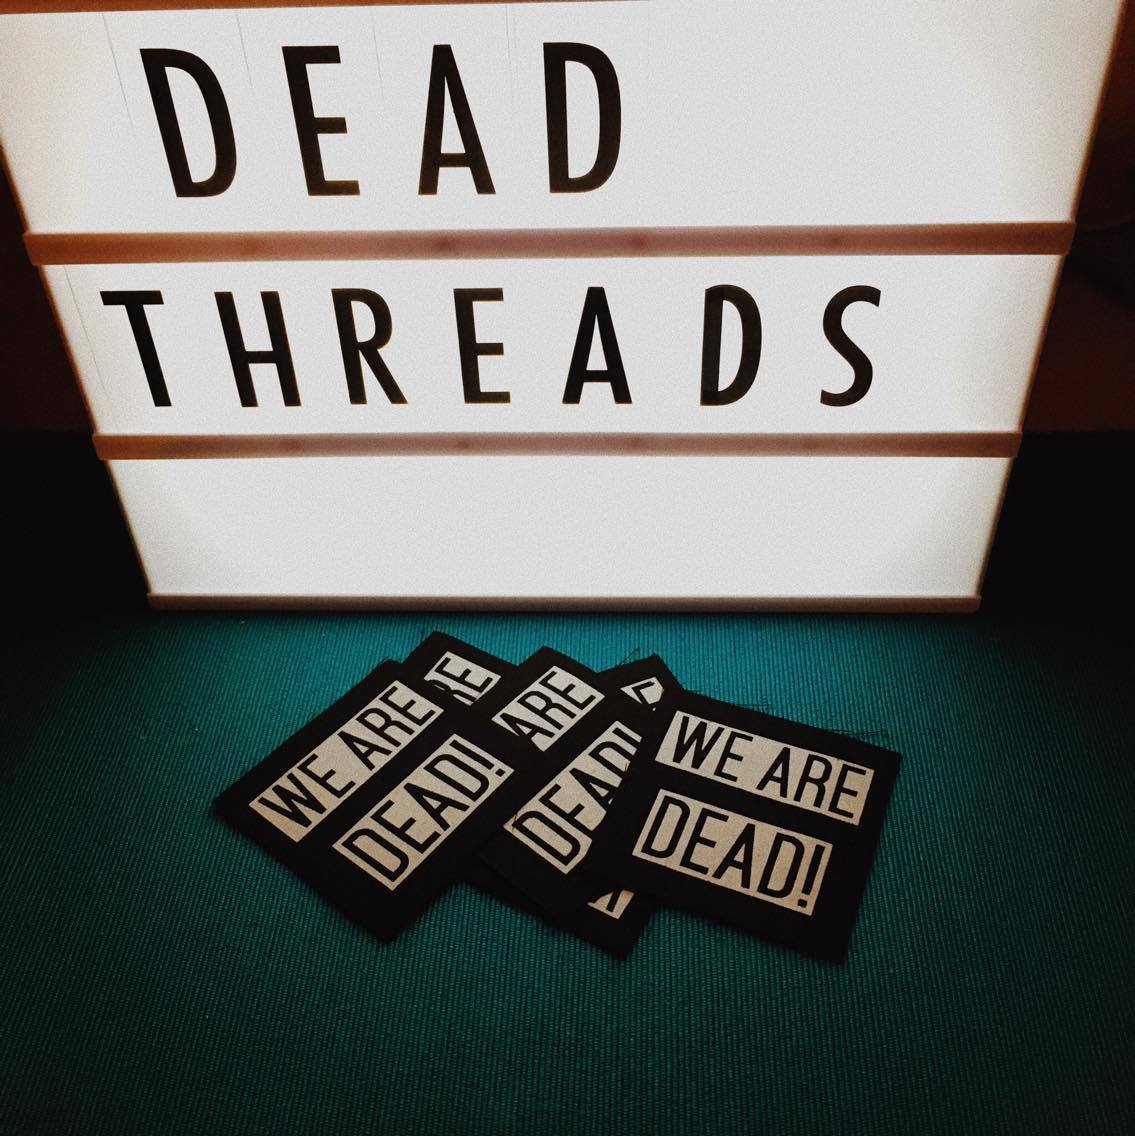 THE DEADTHREADS SALE CONTINUES. ENTER CODE ‘TYLERDURDEN’ FOR 15% OFF ALL CLOTHING X